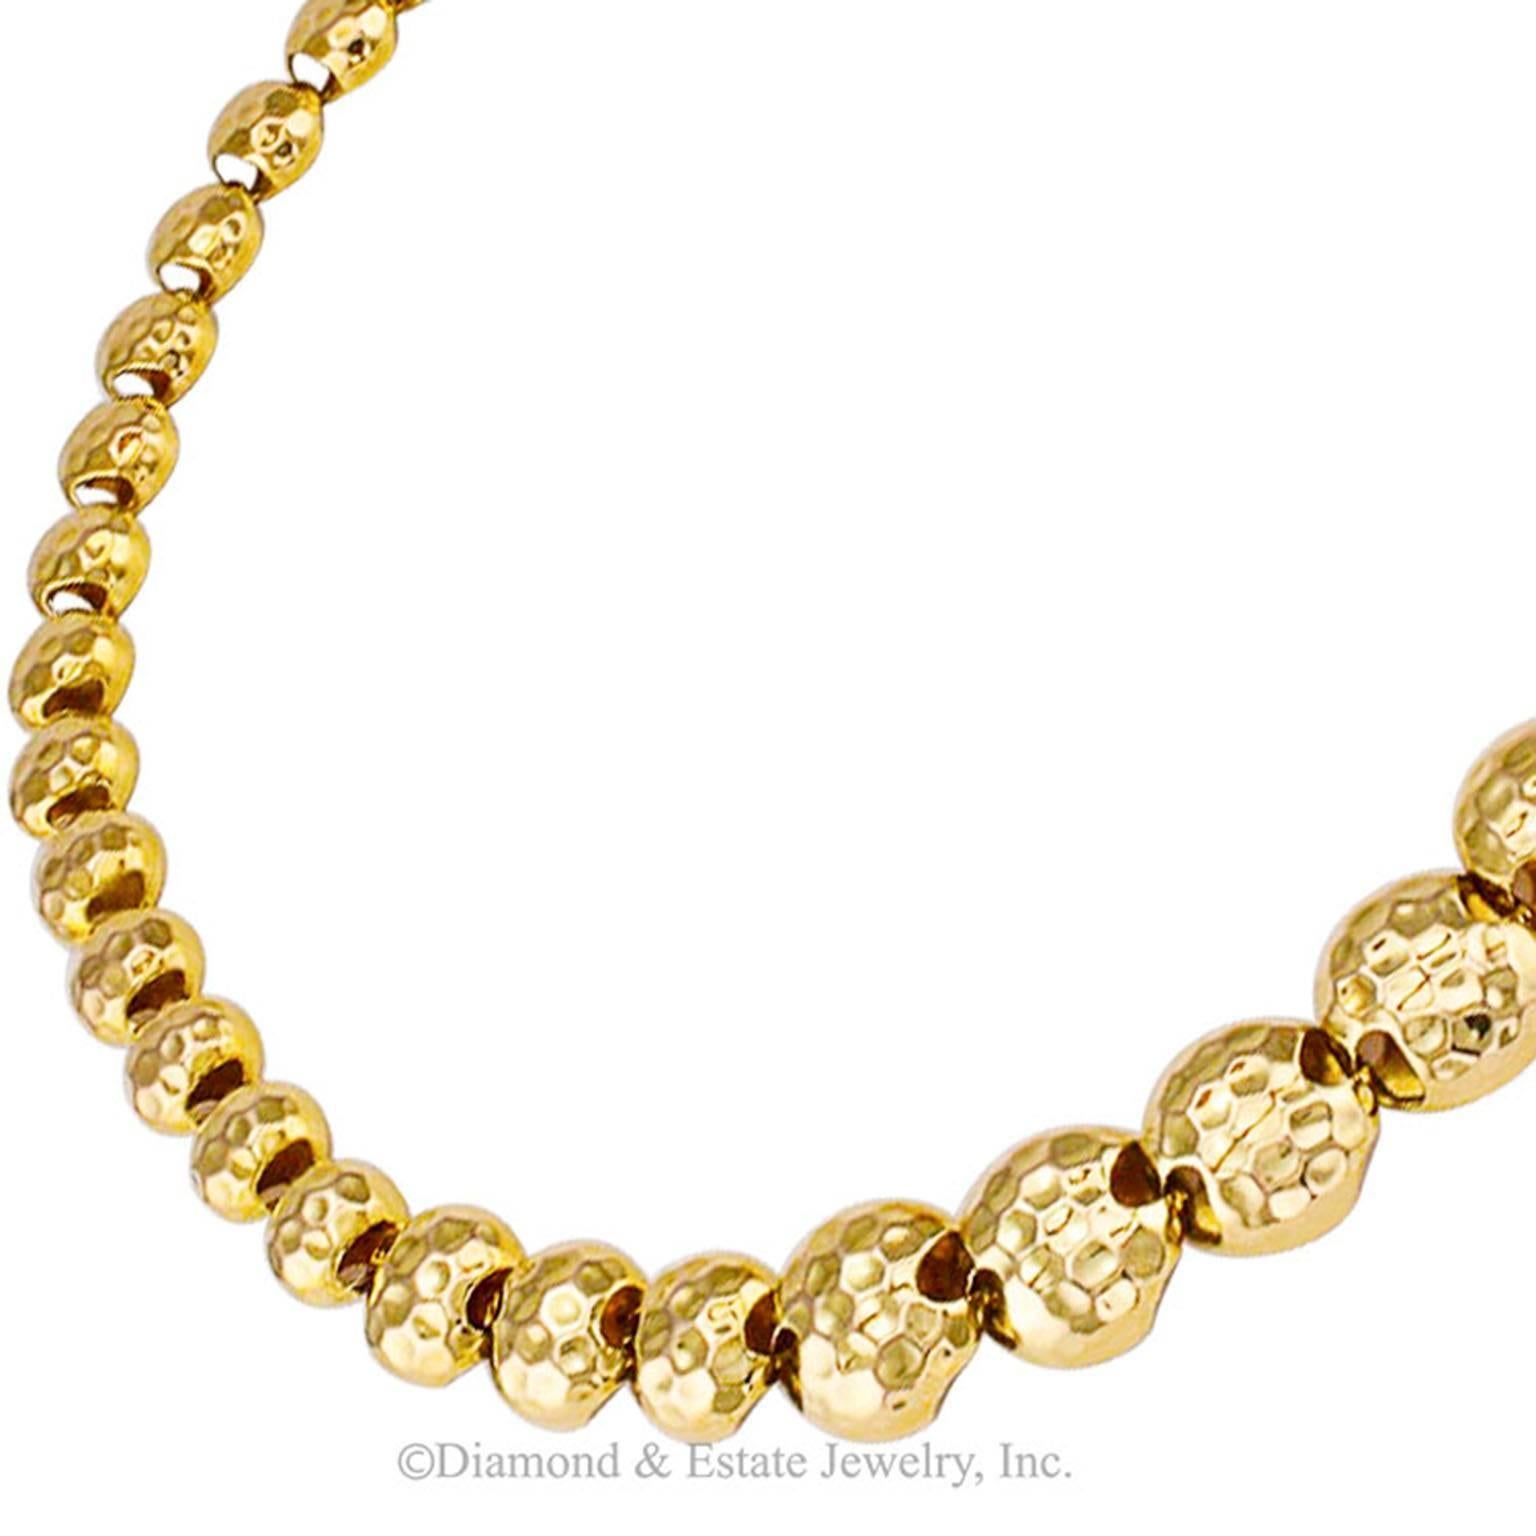 Contemporary 1980s Hammered Gold Bead Necklace